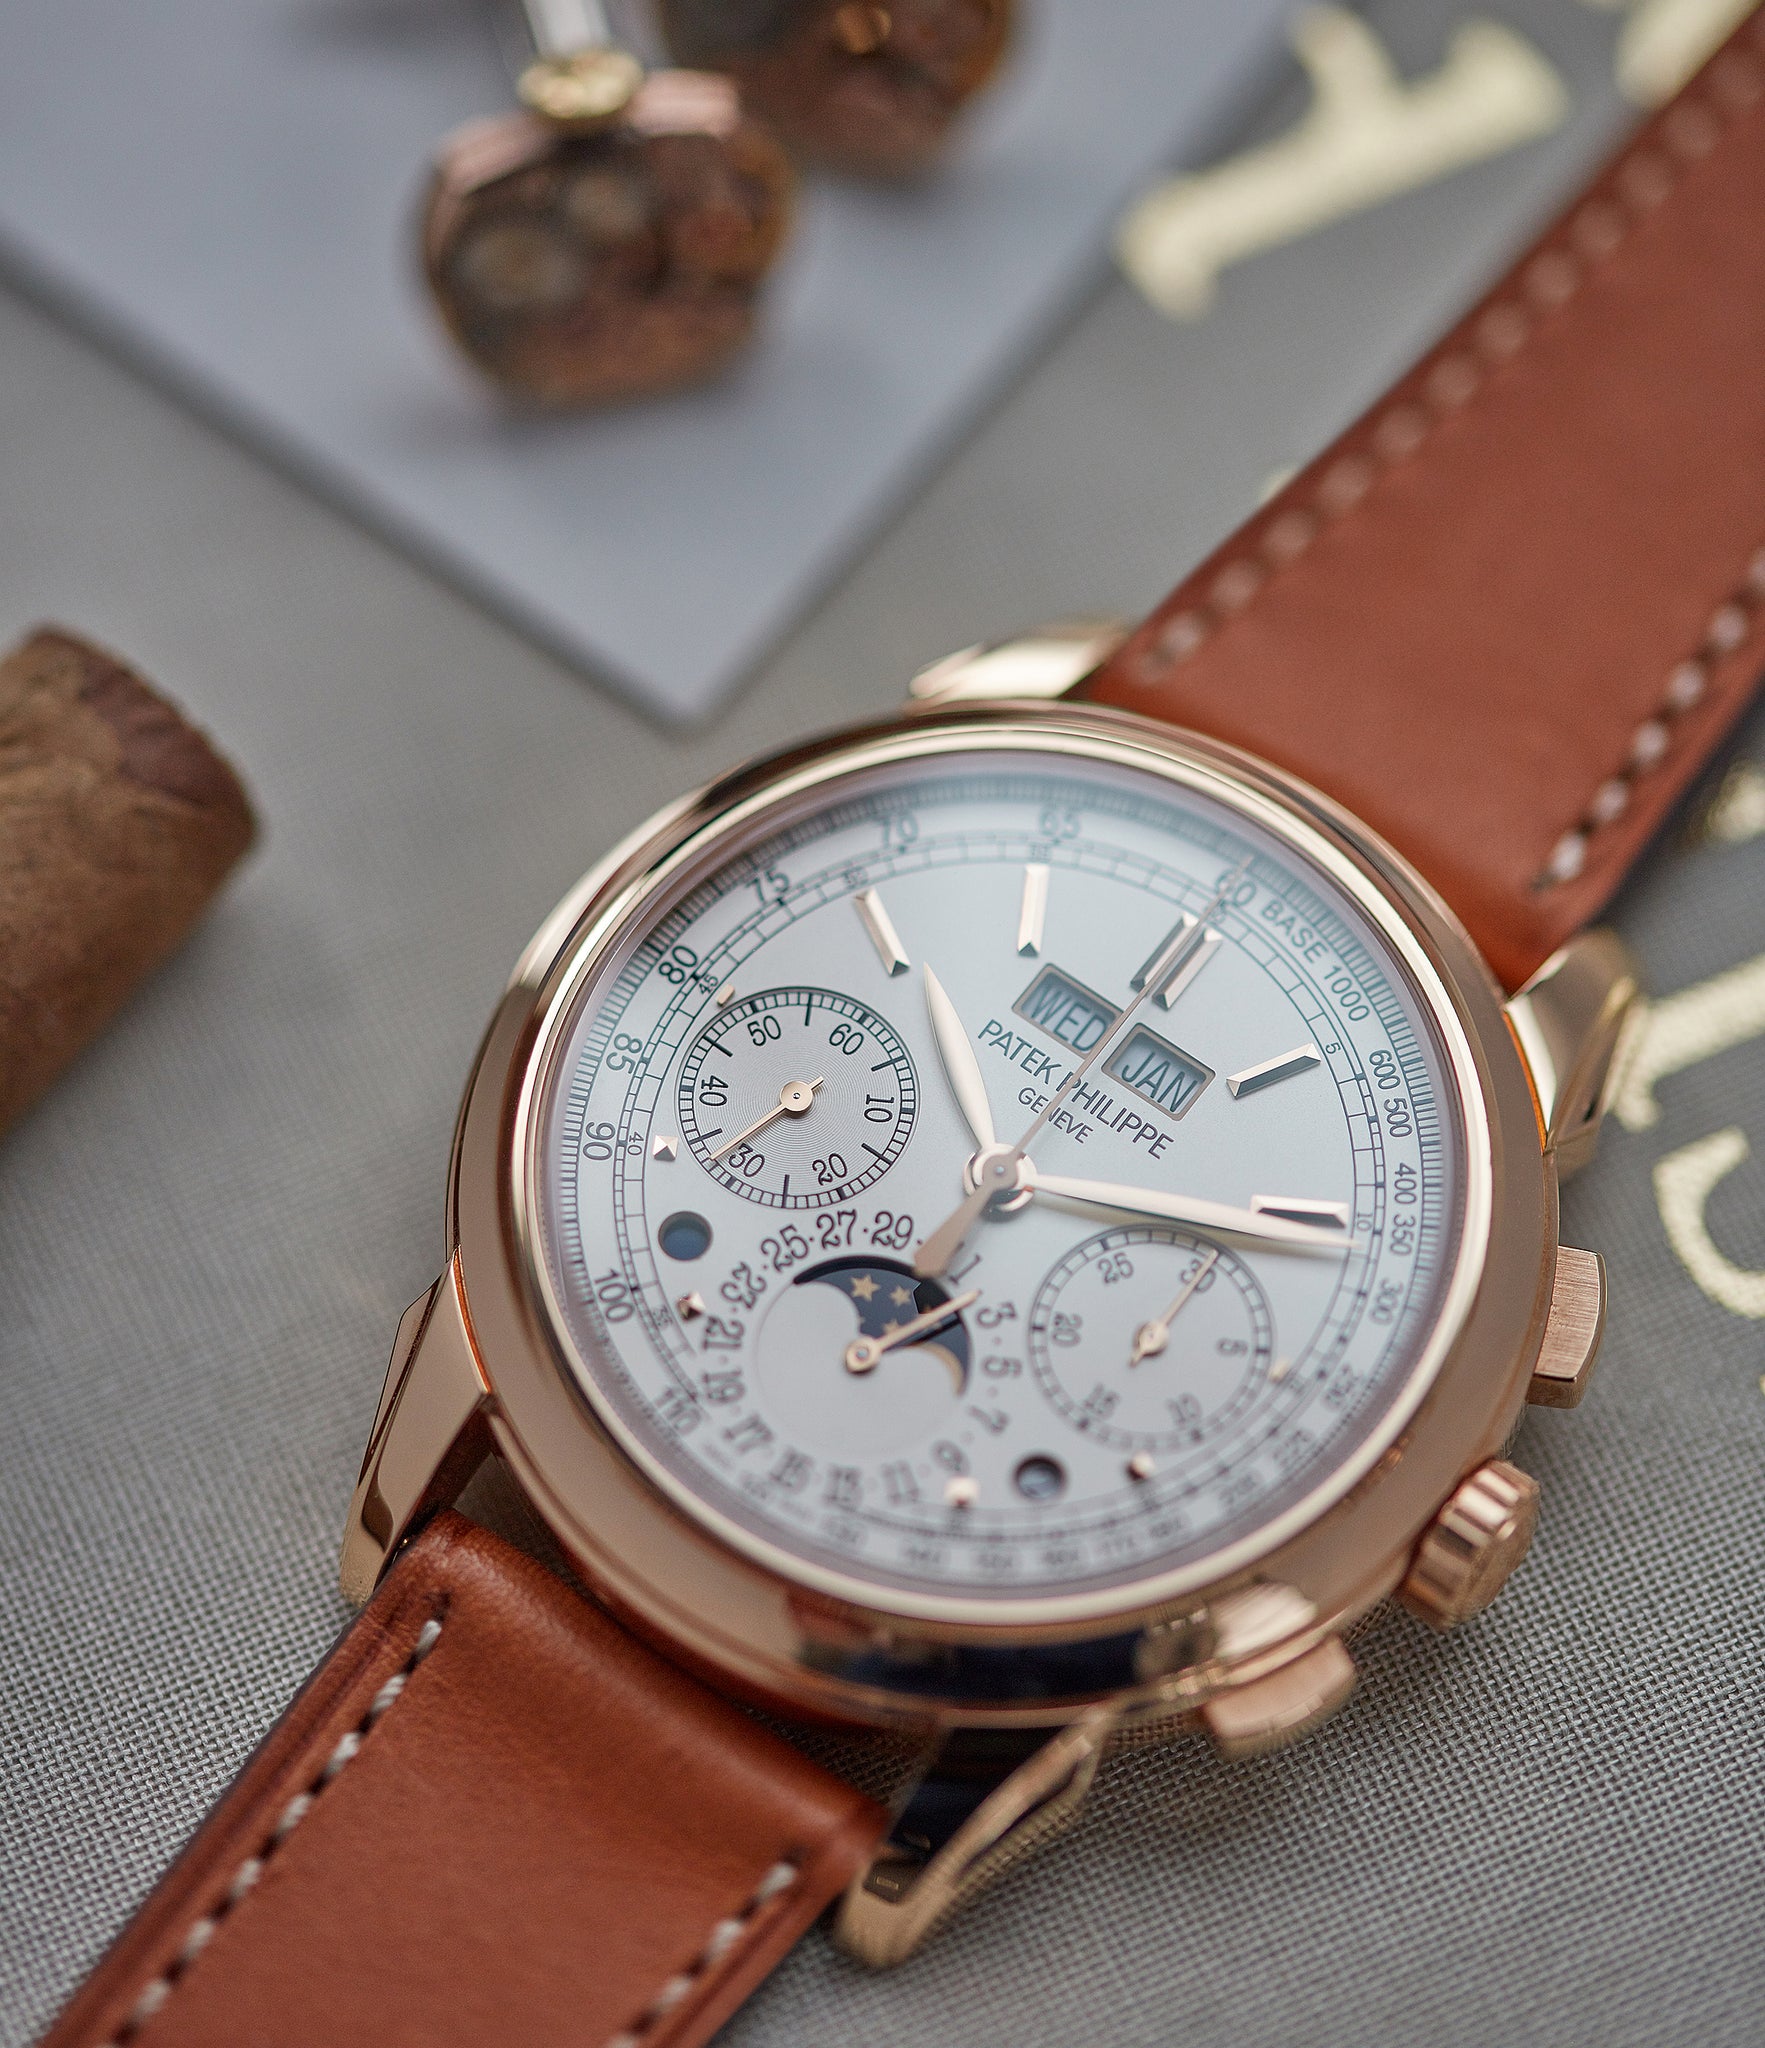 selling Patek Philippe 5270R Grand Complications Perpetual Calendar Chronograph rose gold dress watch for sale online at A Collected Man London UK specialist of rare watches